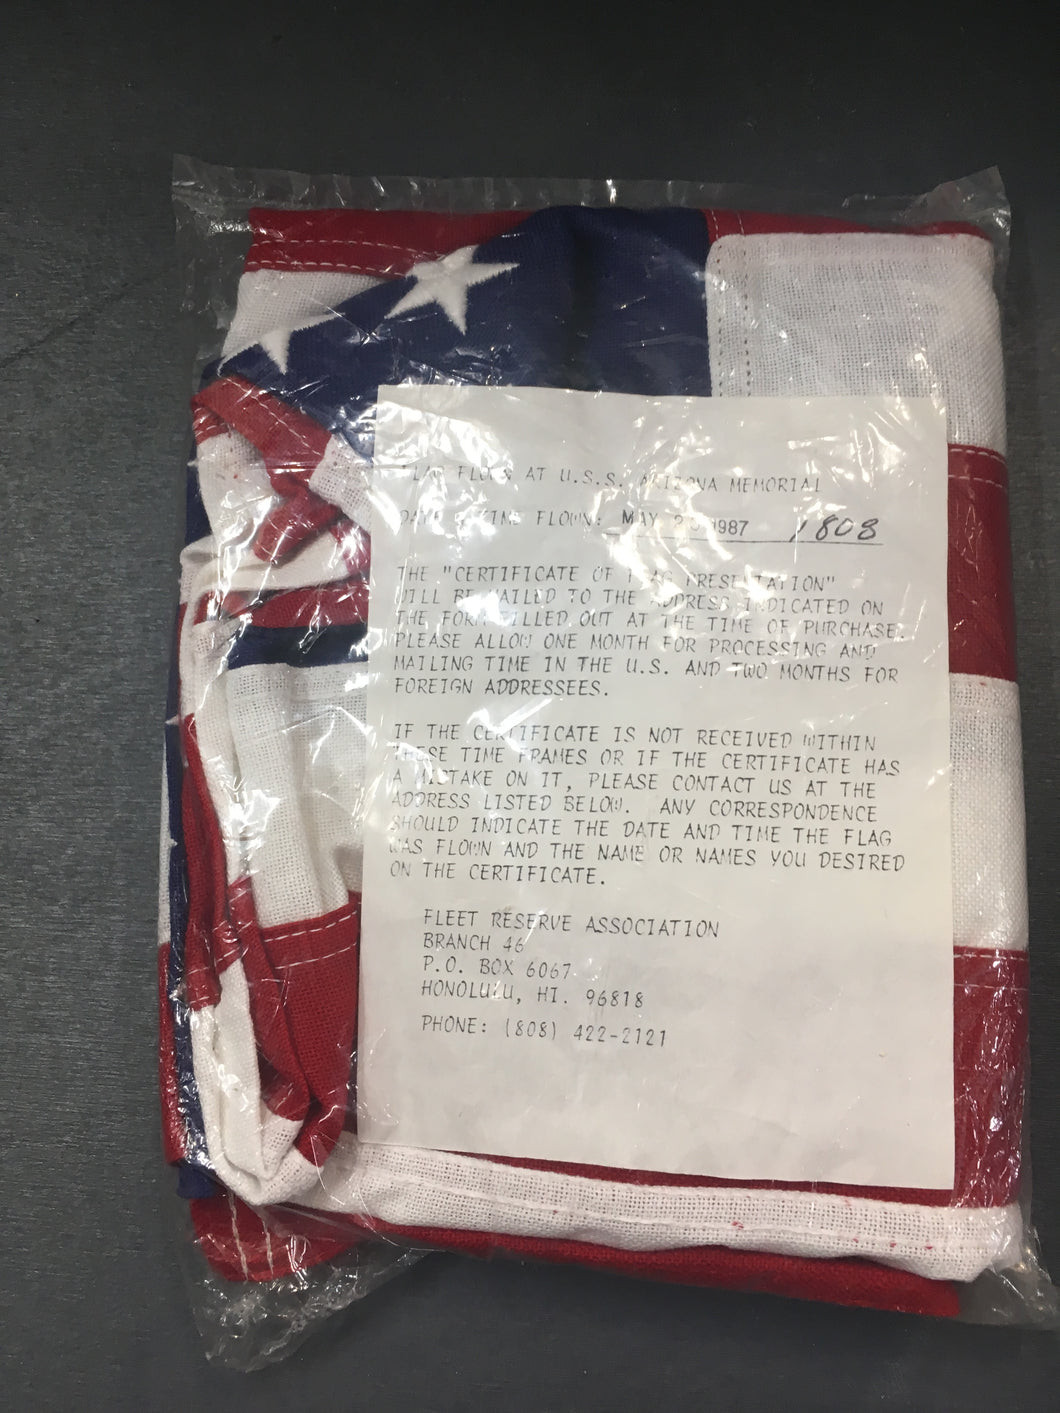 Unique ~ United States American Flag Flown Over The U.S.S. Arizona Memorial May 25 1987 at 1808 Hours